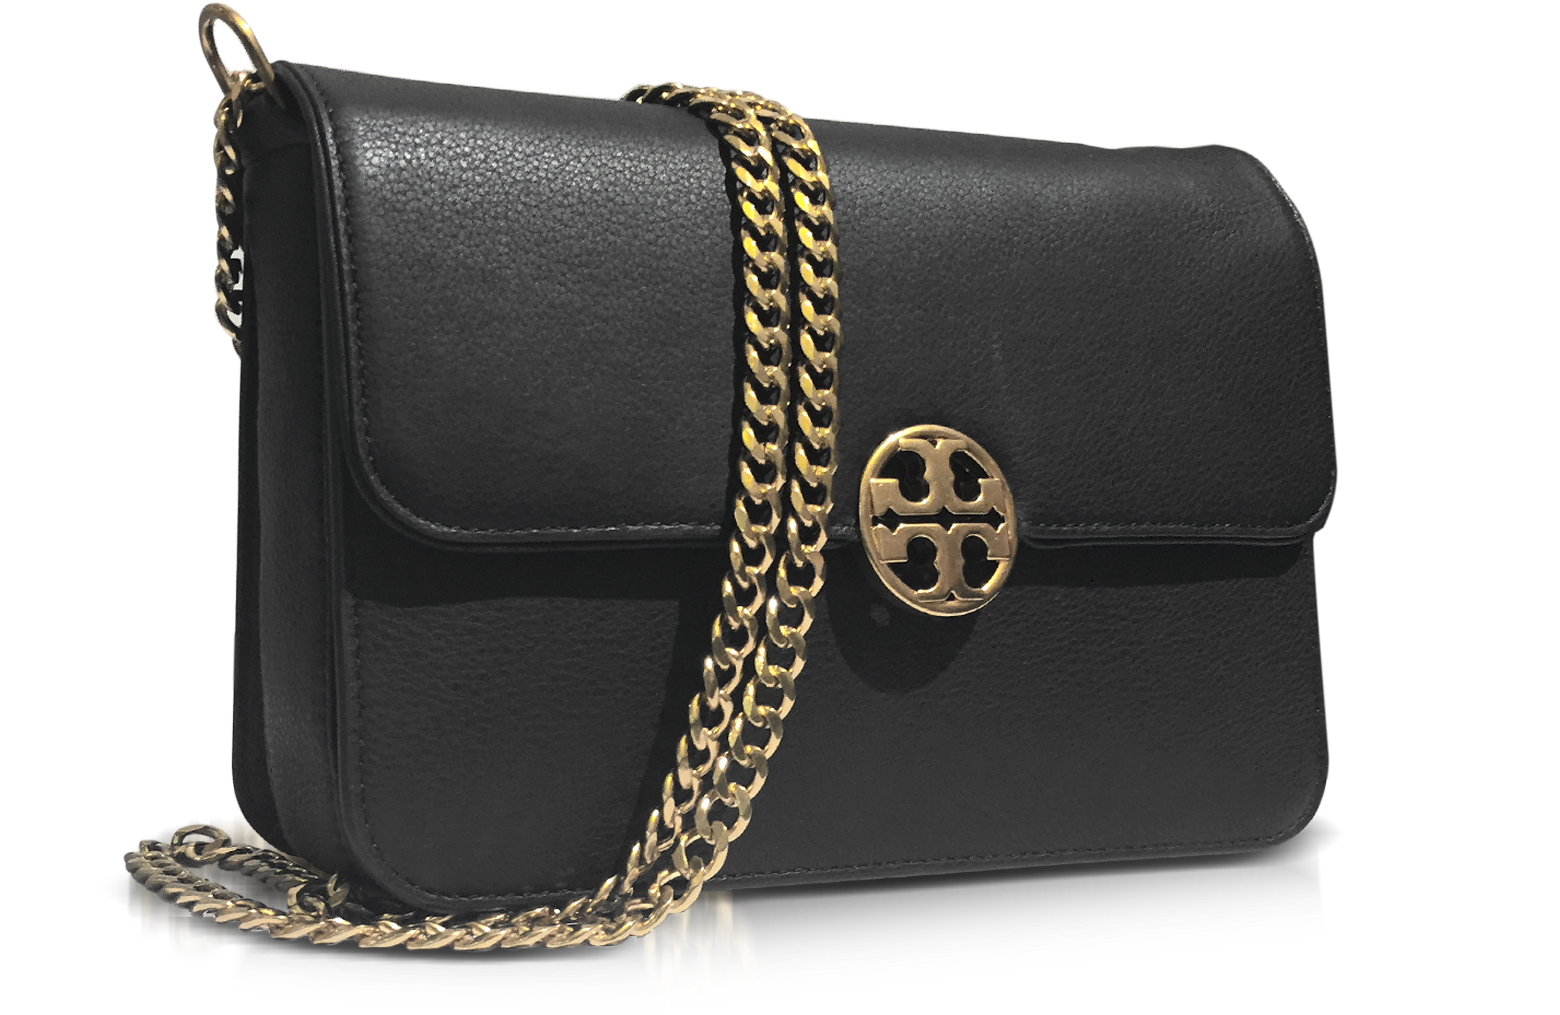 Tory Burch Black Chelsea Leather Shoulder Bag at FORZIERI